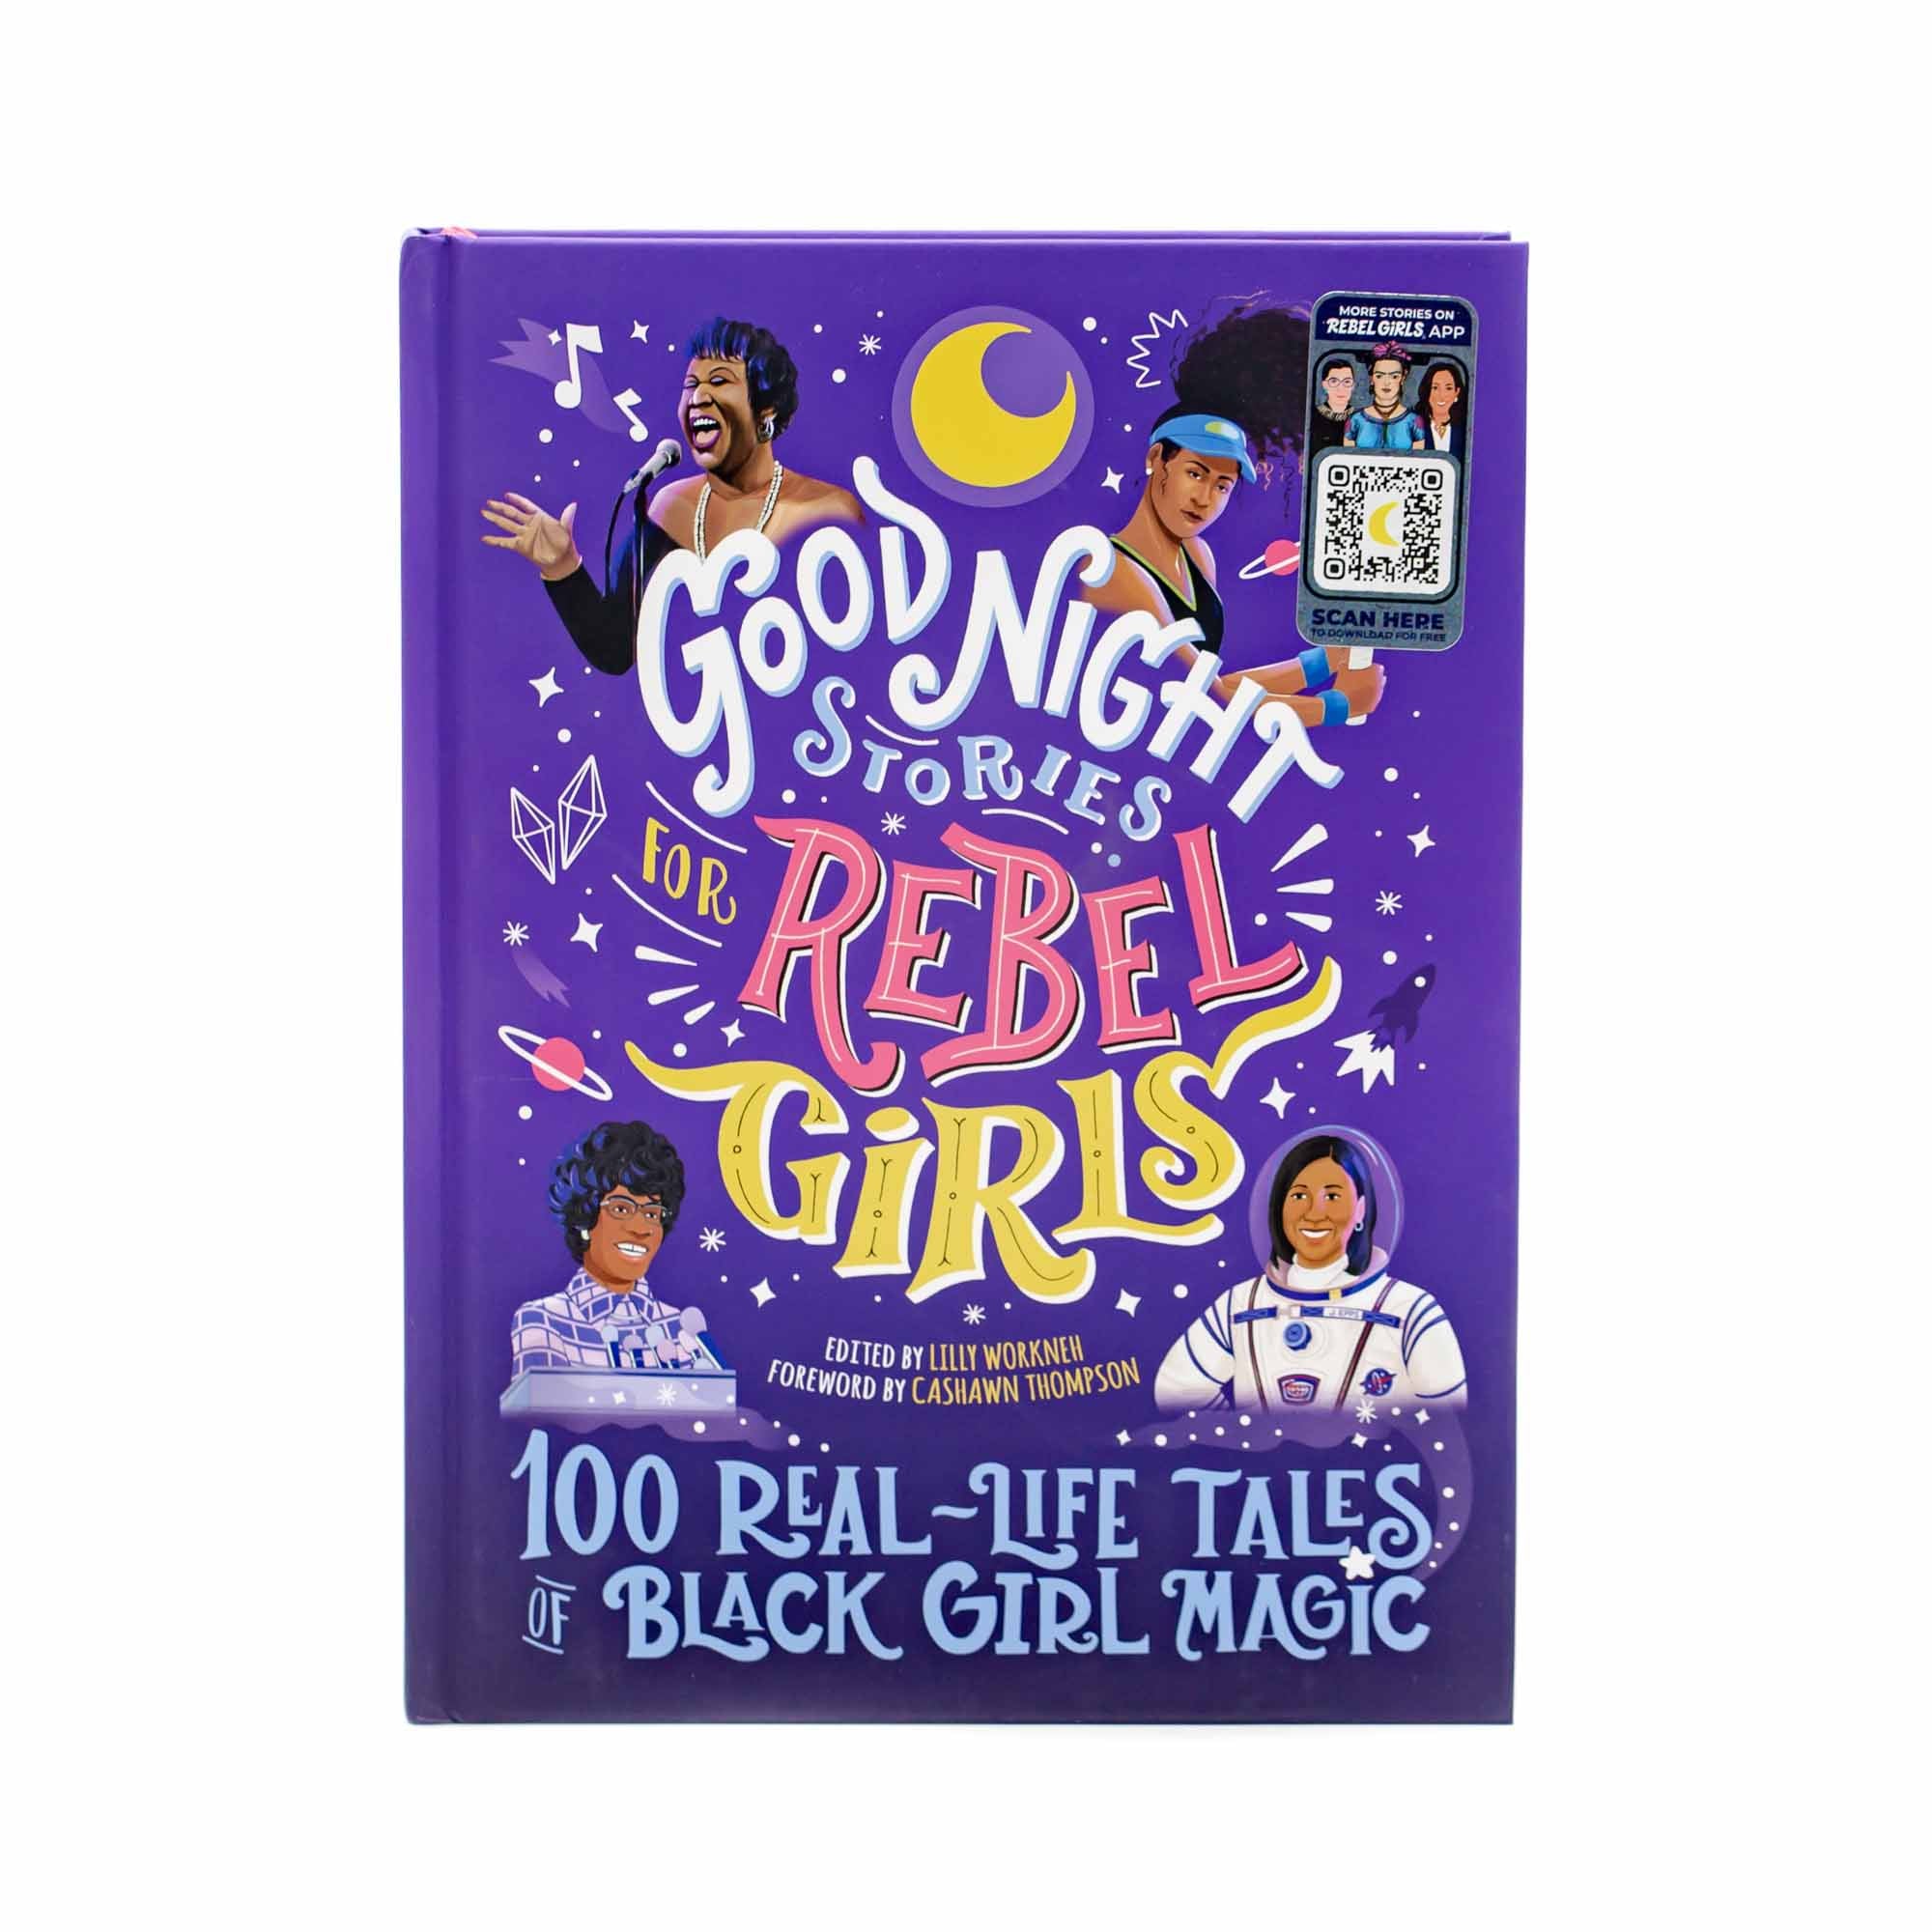 Goodnight Stories For Rebel Girls - Mortise And Tenon